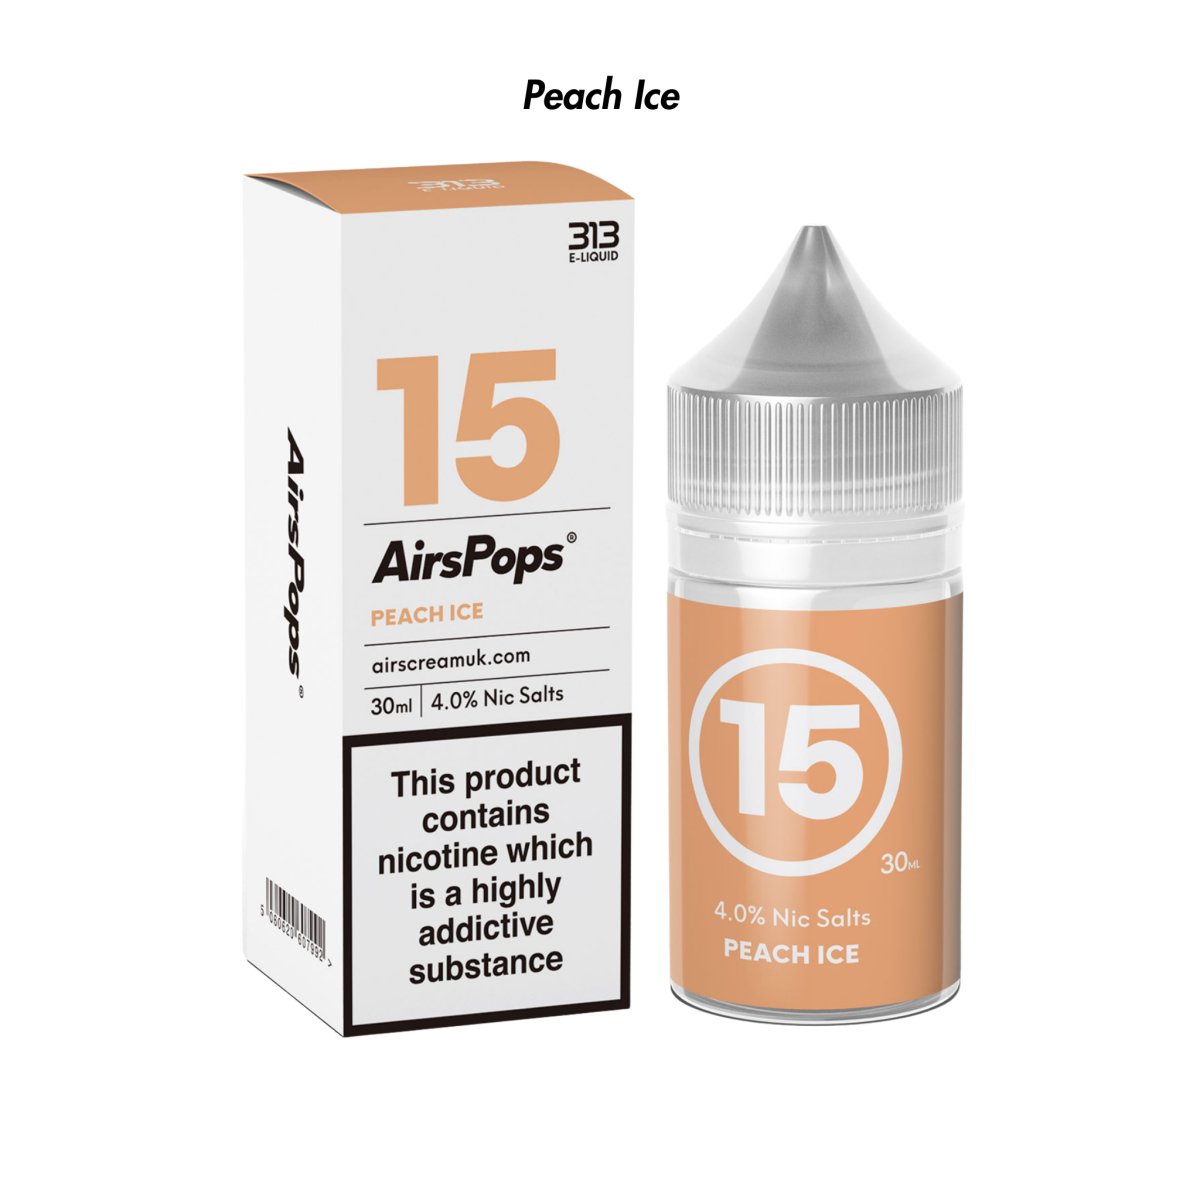 Peach Ice Prefilled Airscream 1/7 Pods from The Smoke Organic Store with Fast Delivery in South Africa